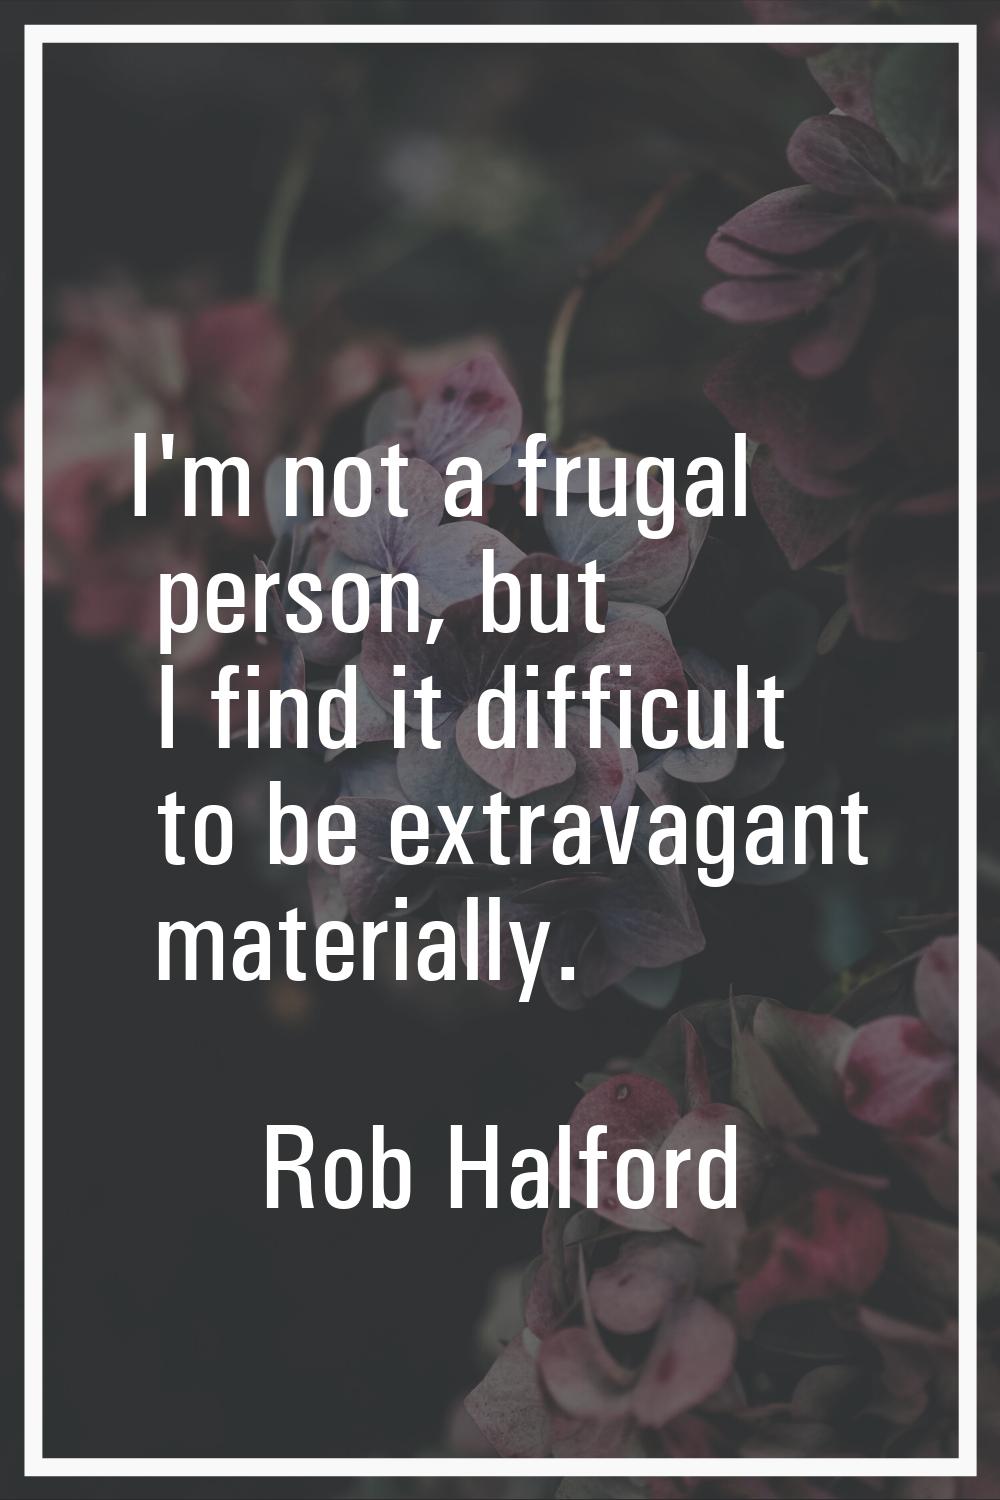 I'm not a frugal person, but I find it difficult to be extravagant materially.